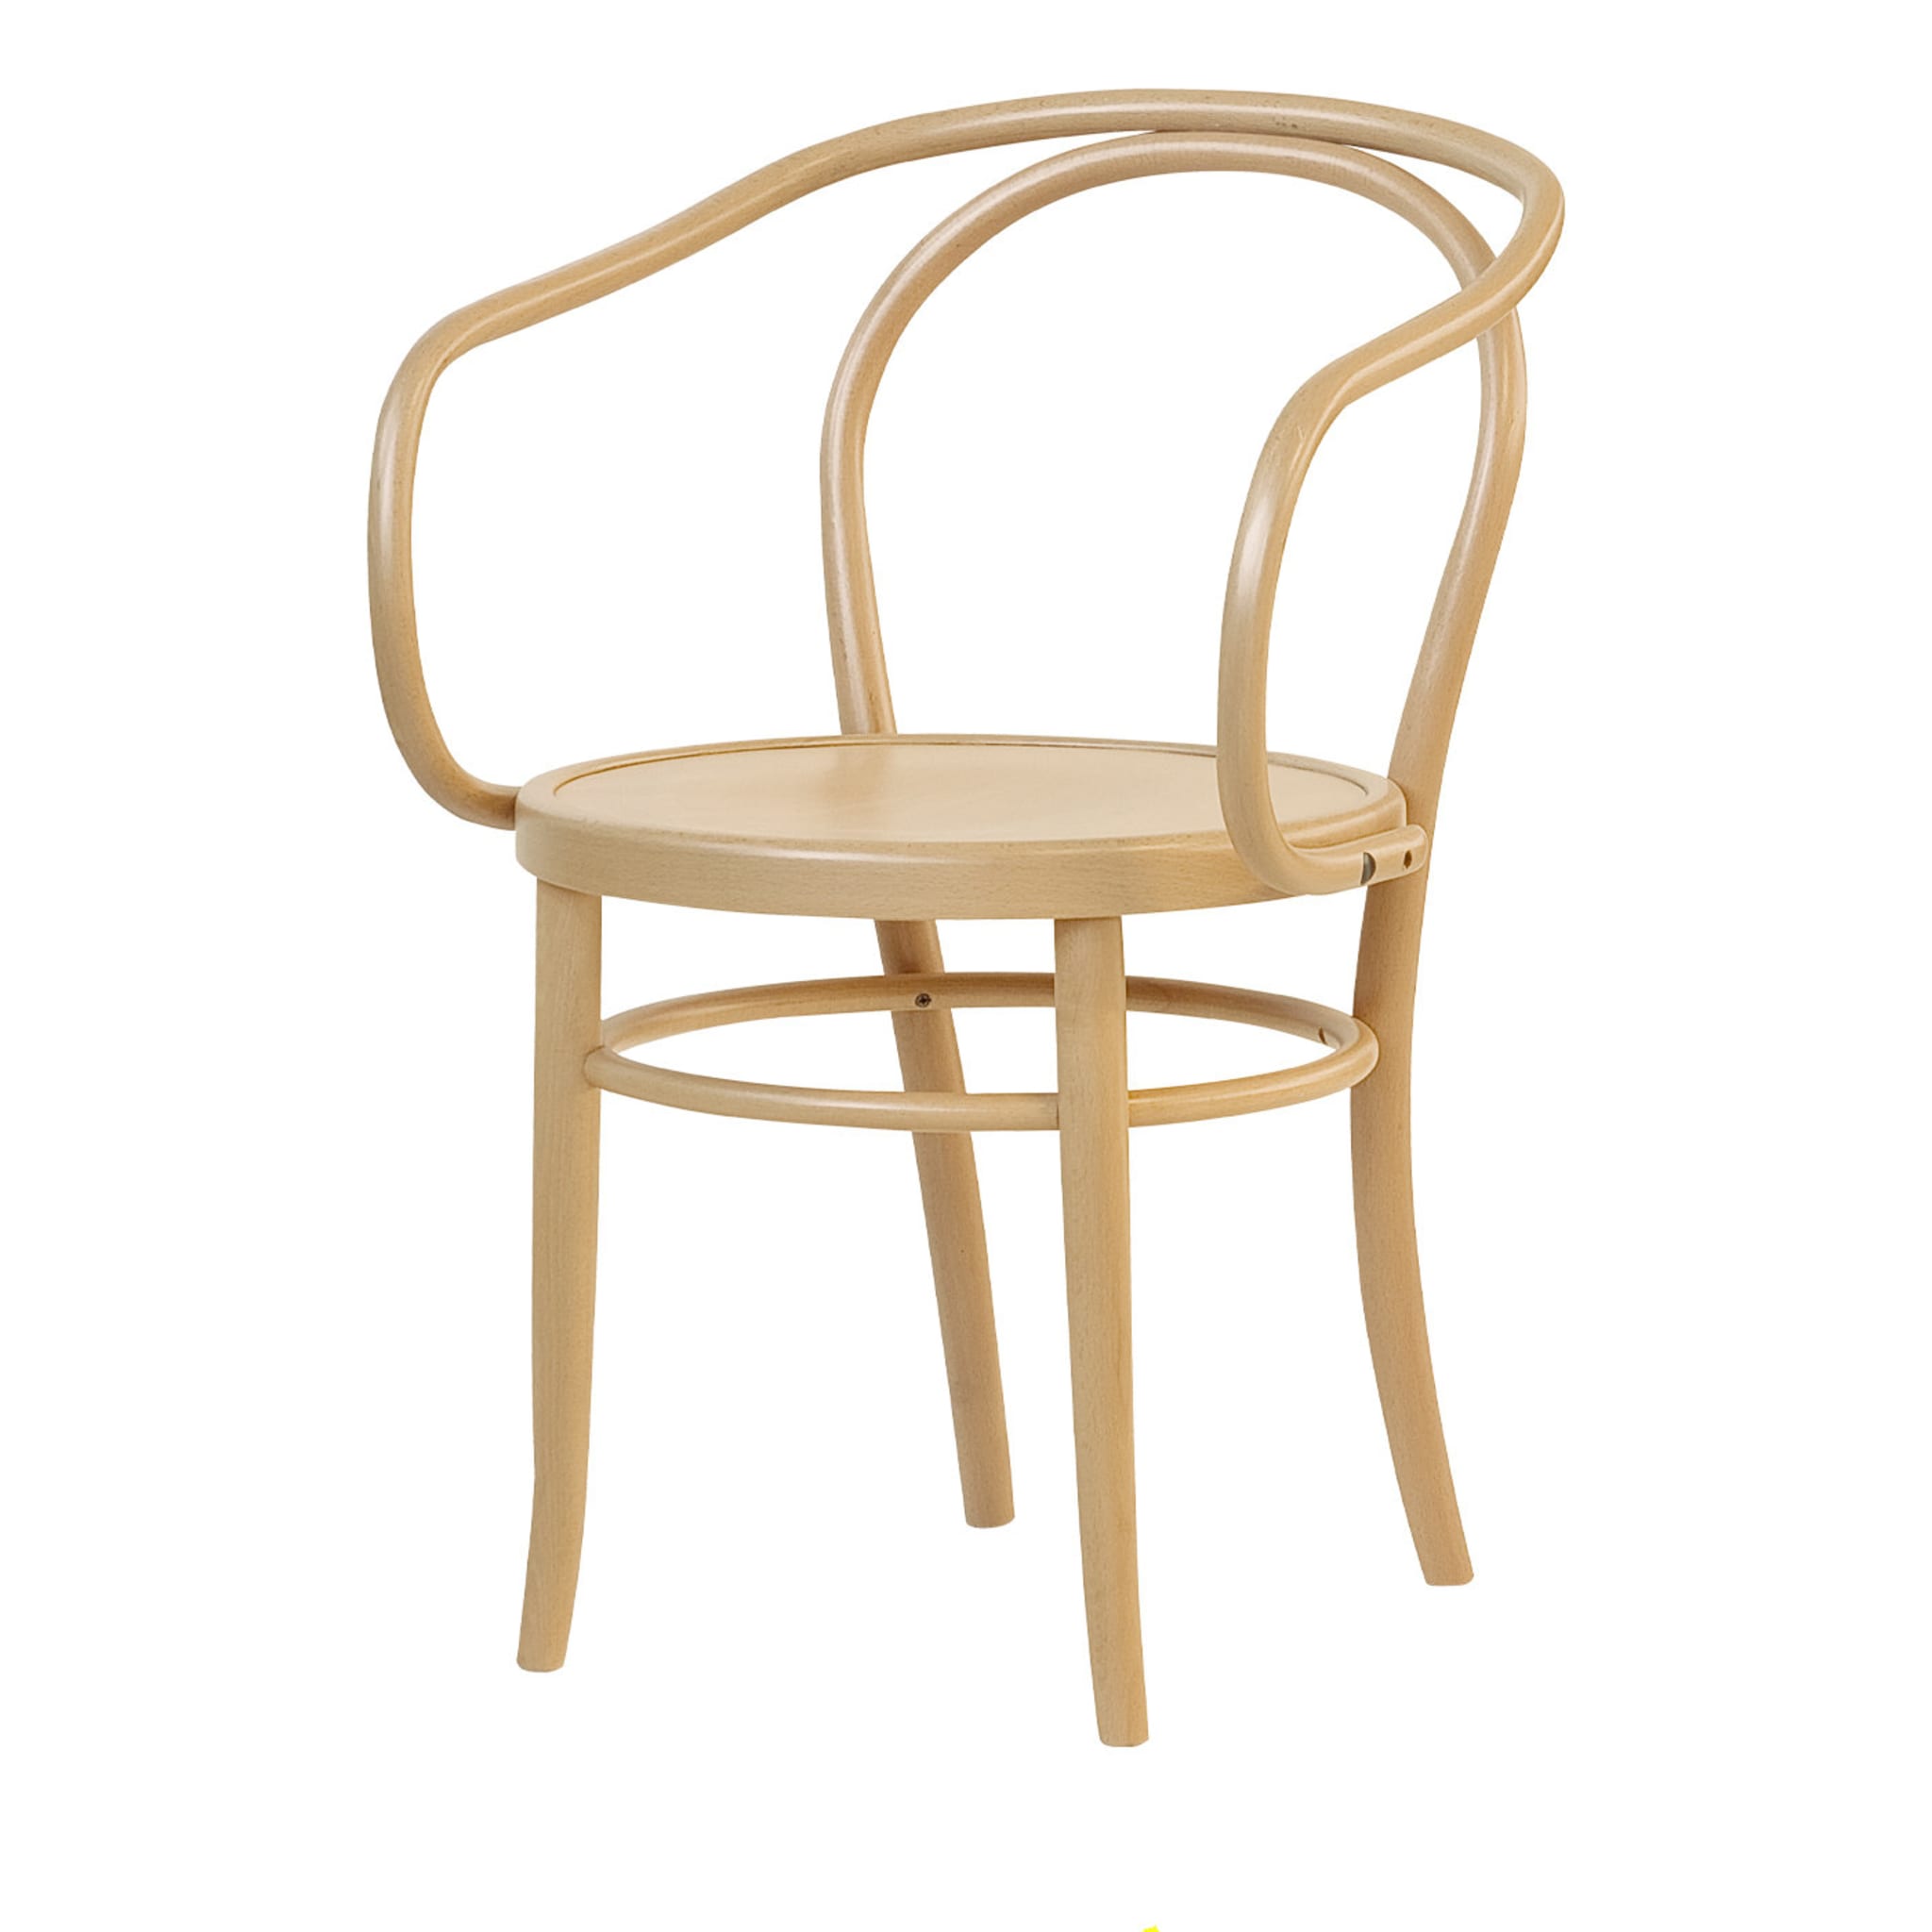 08 Beige Chair with Armrests - Main view